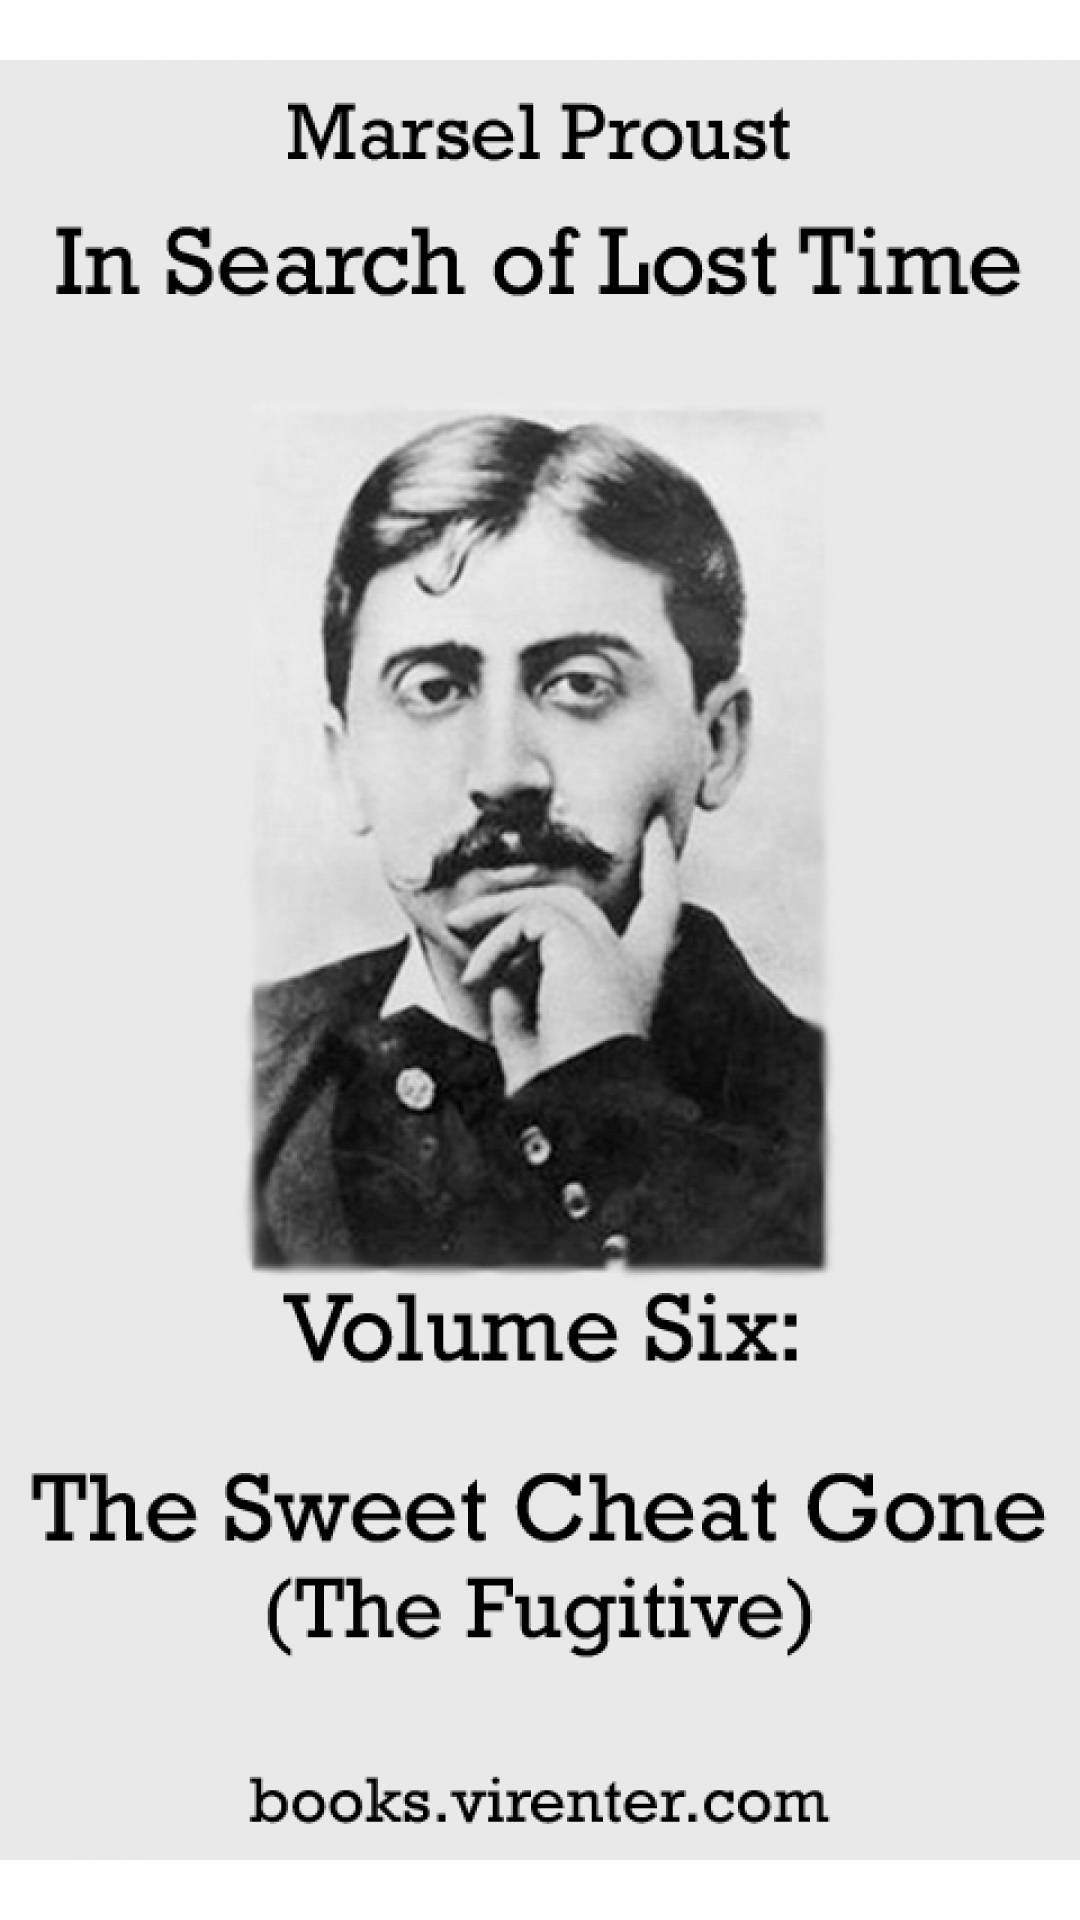 Marcel Proust - The Sweet Cheat Gone (The Fugitive)